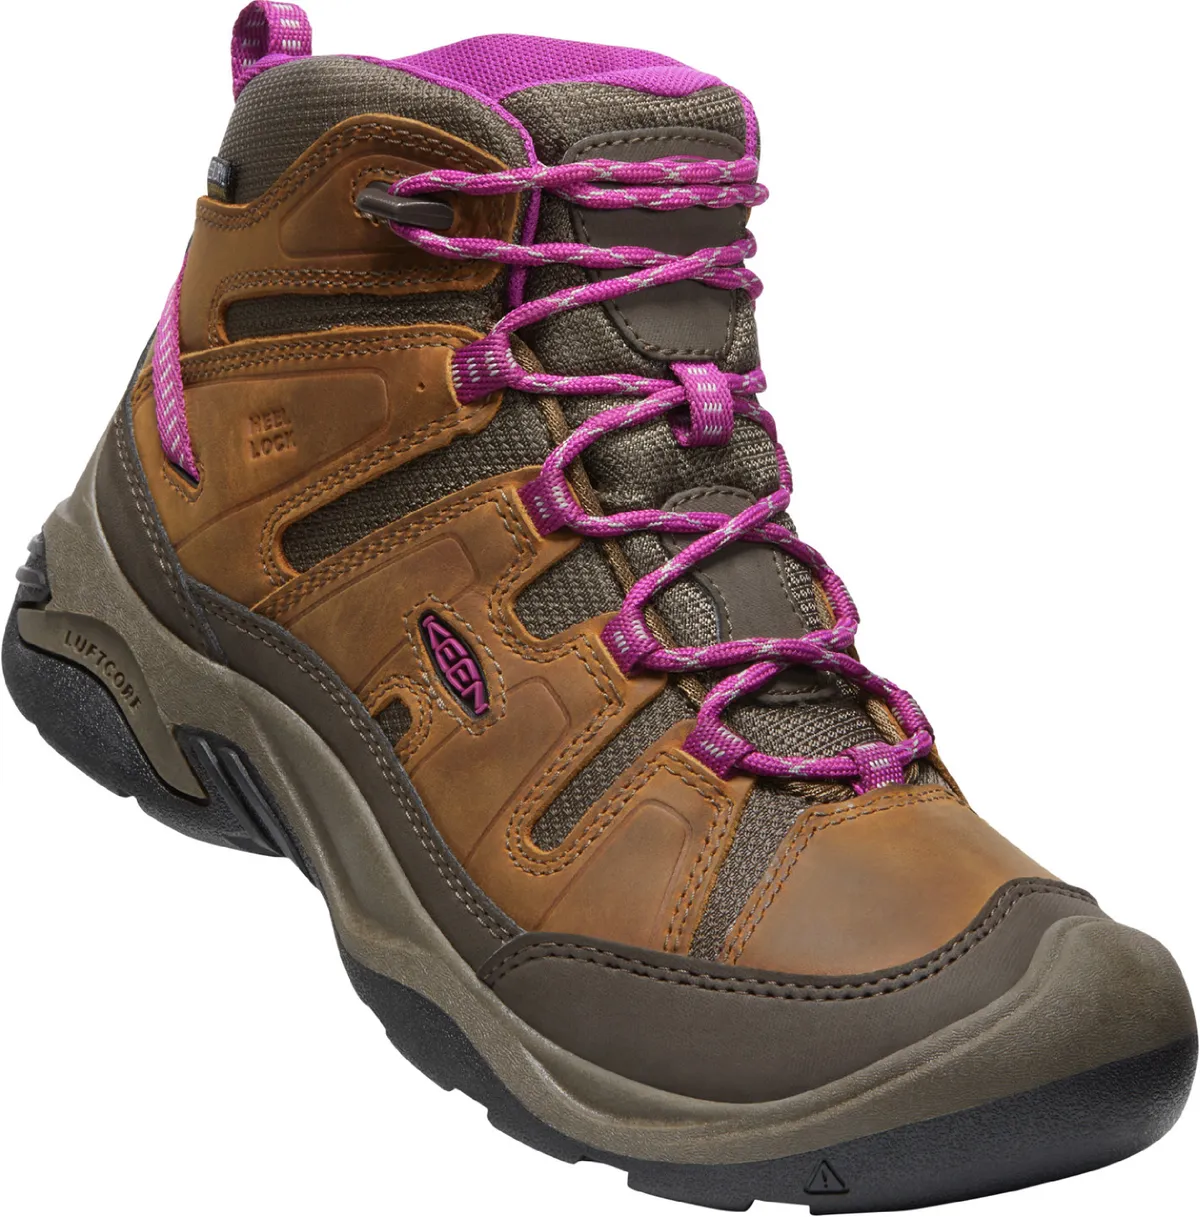 Women's brown leather walking boot